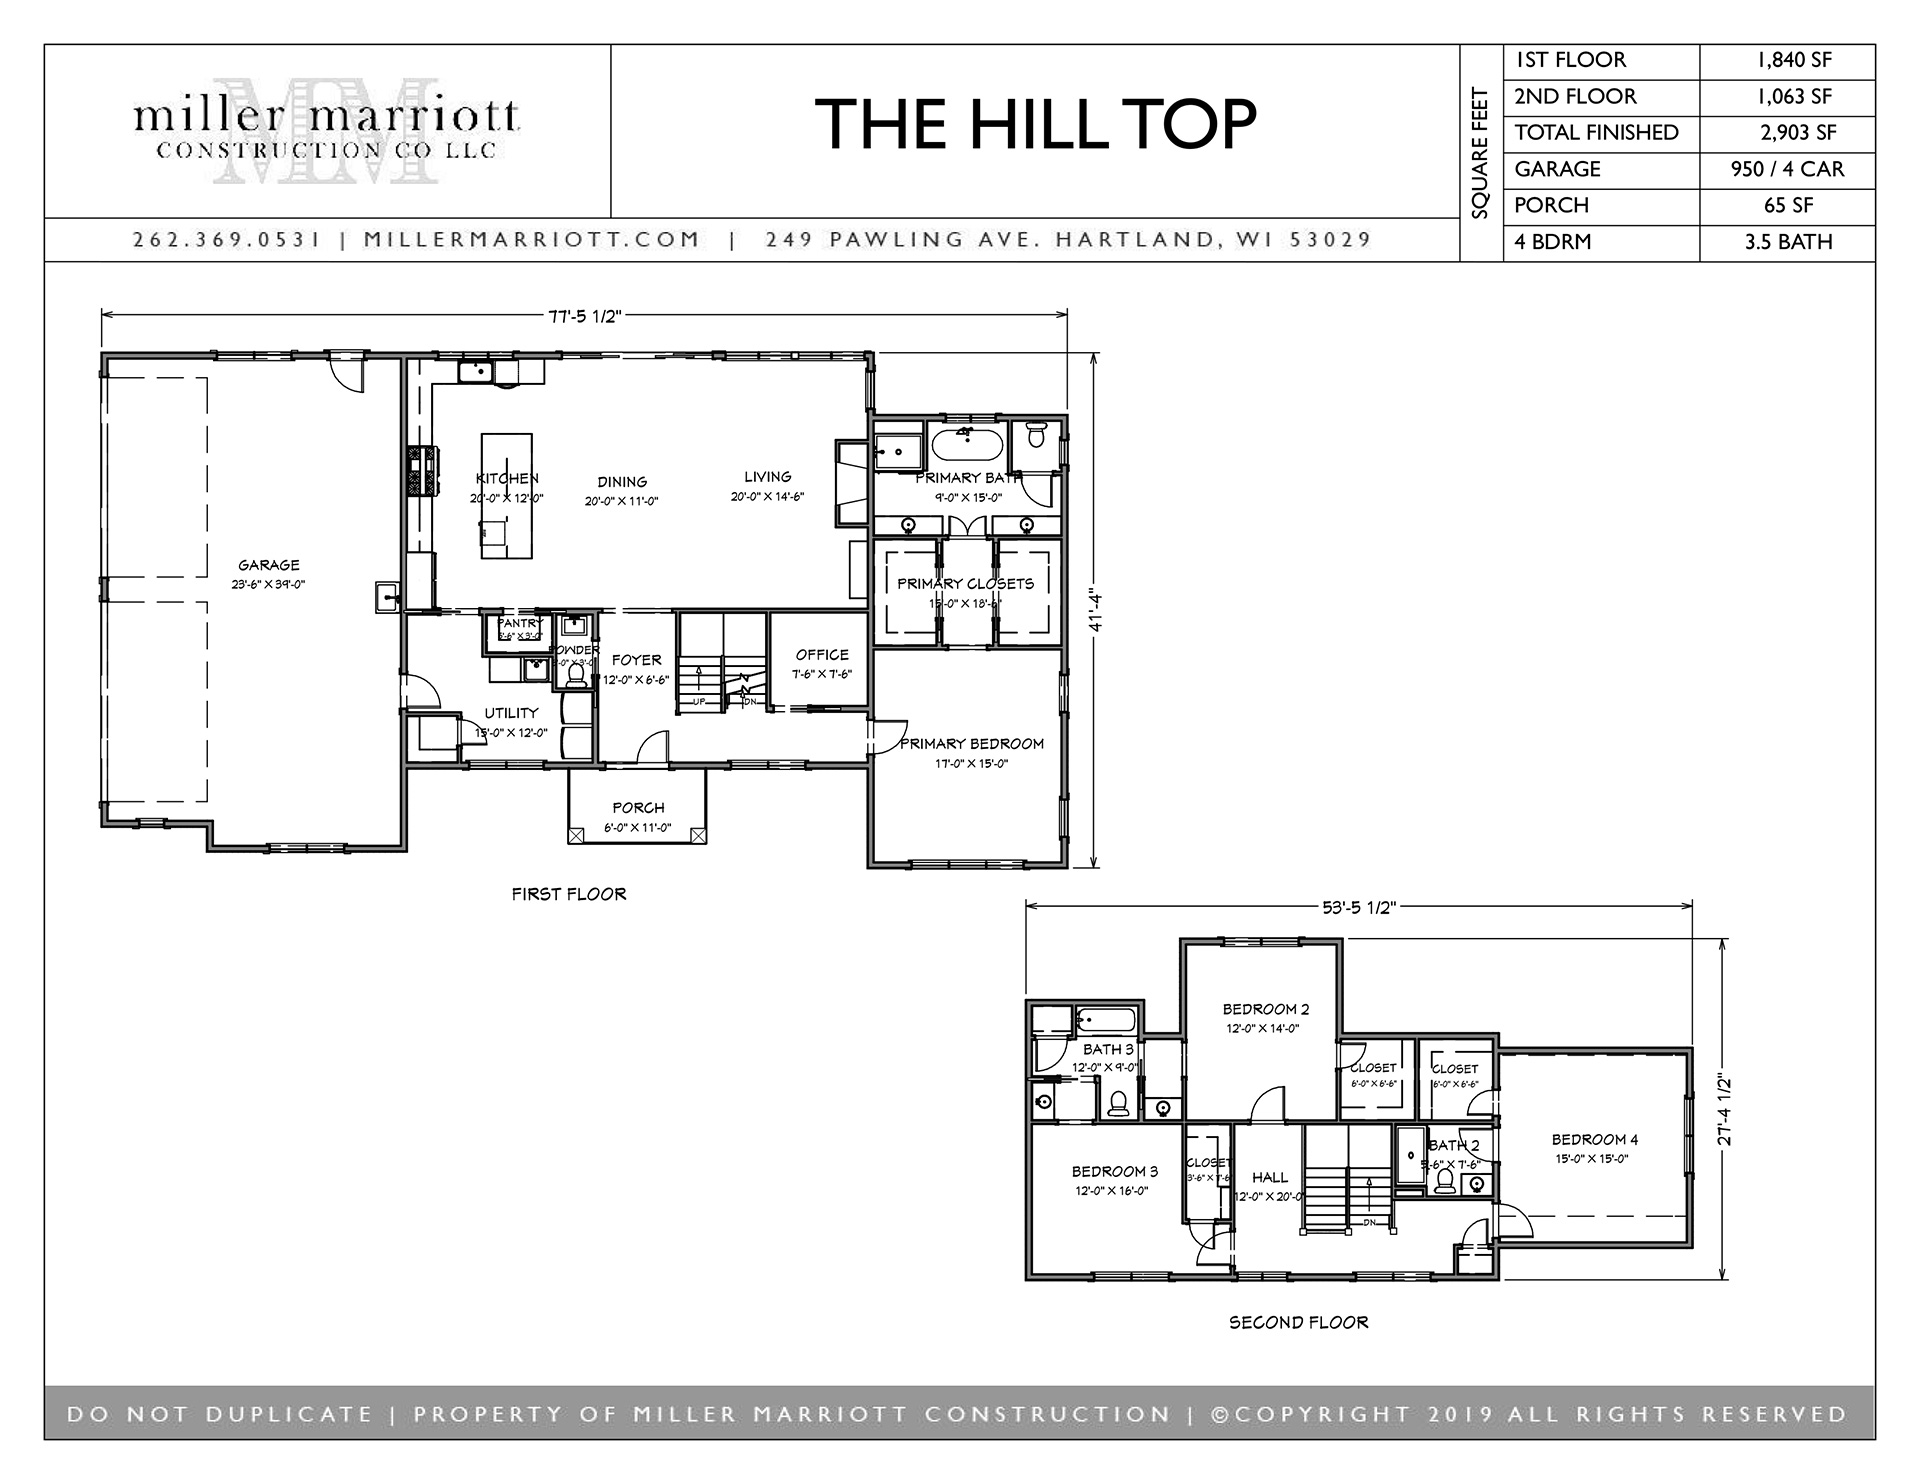 The Hill Top 1st and 2nd Floor plan